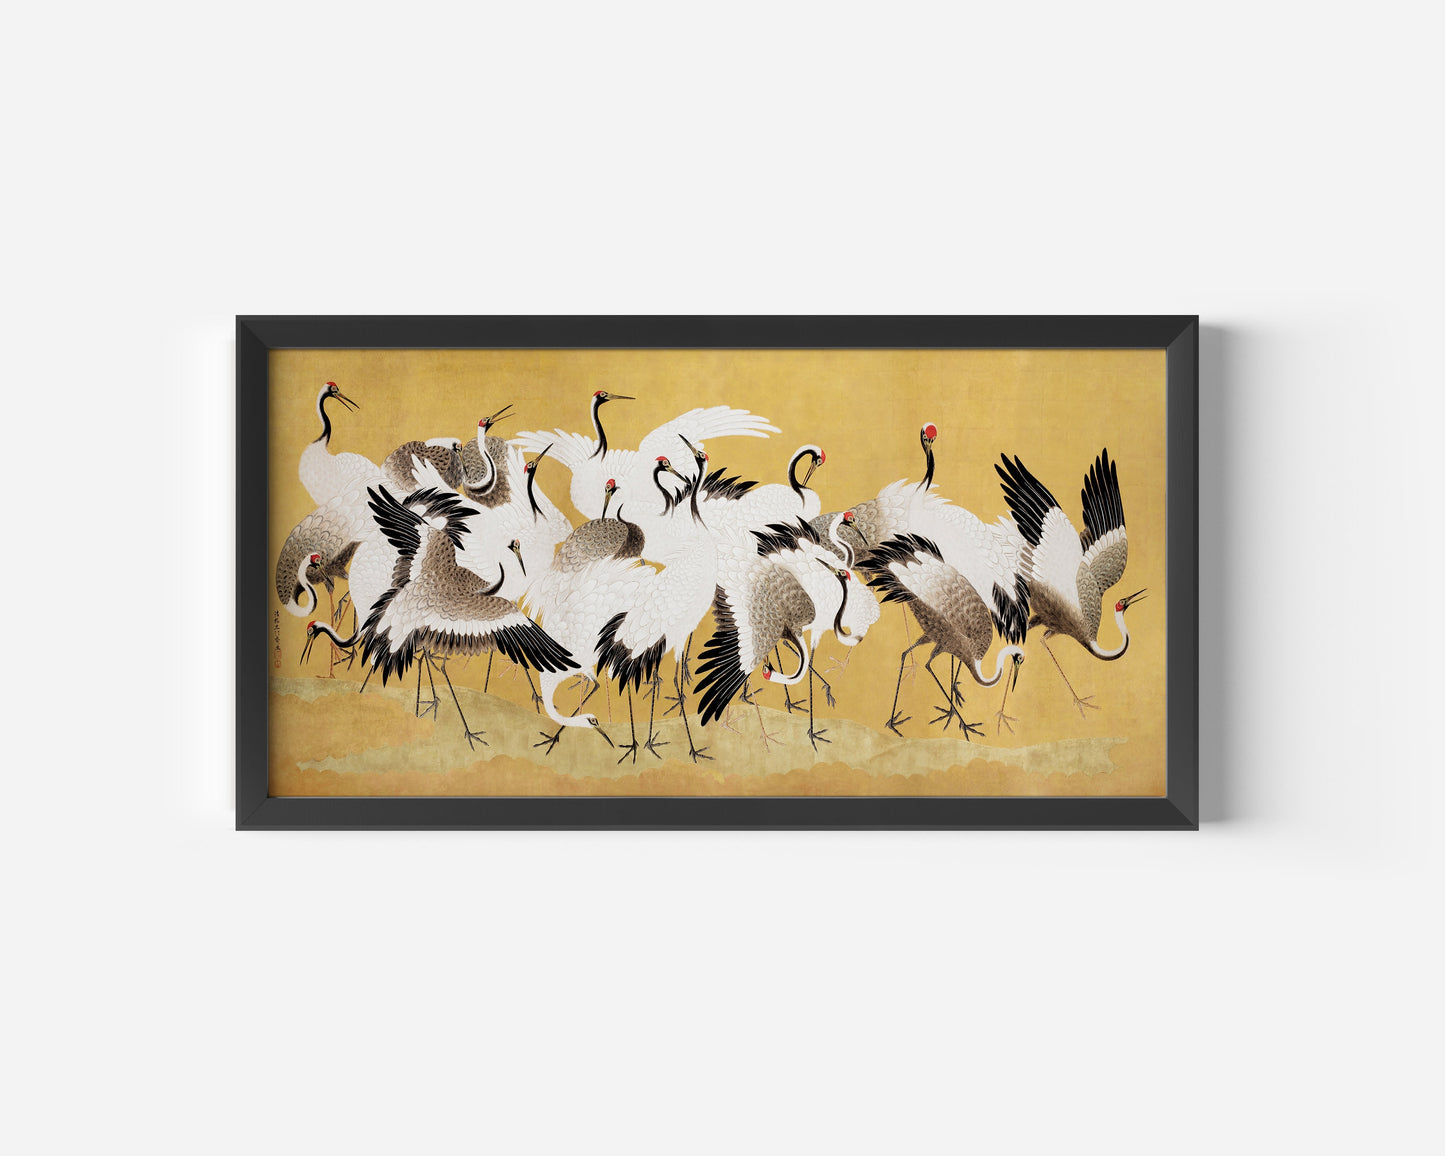 Ishida Yutei - A Flock of Cranes | Vintage Japanese Wide Panoramic Art (available framed or unframed)